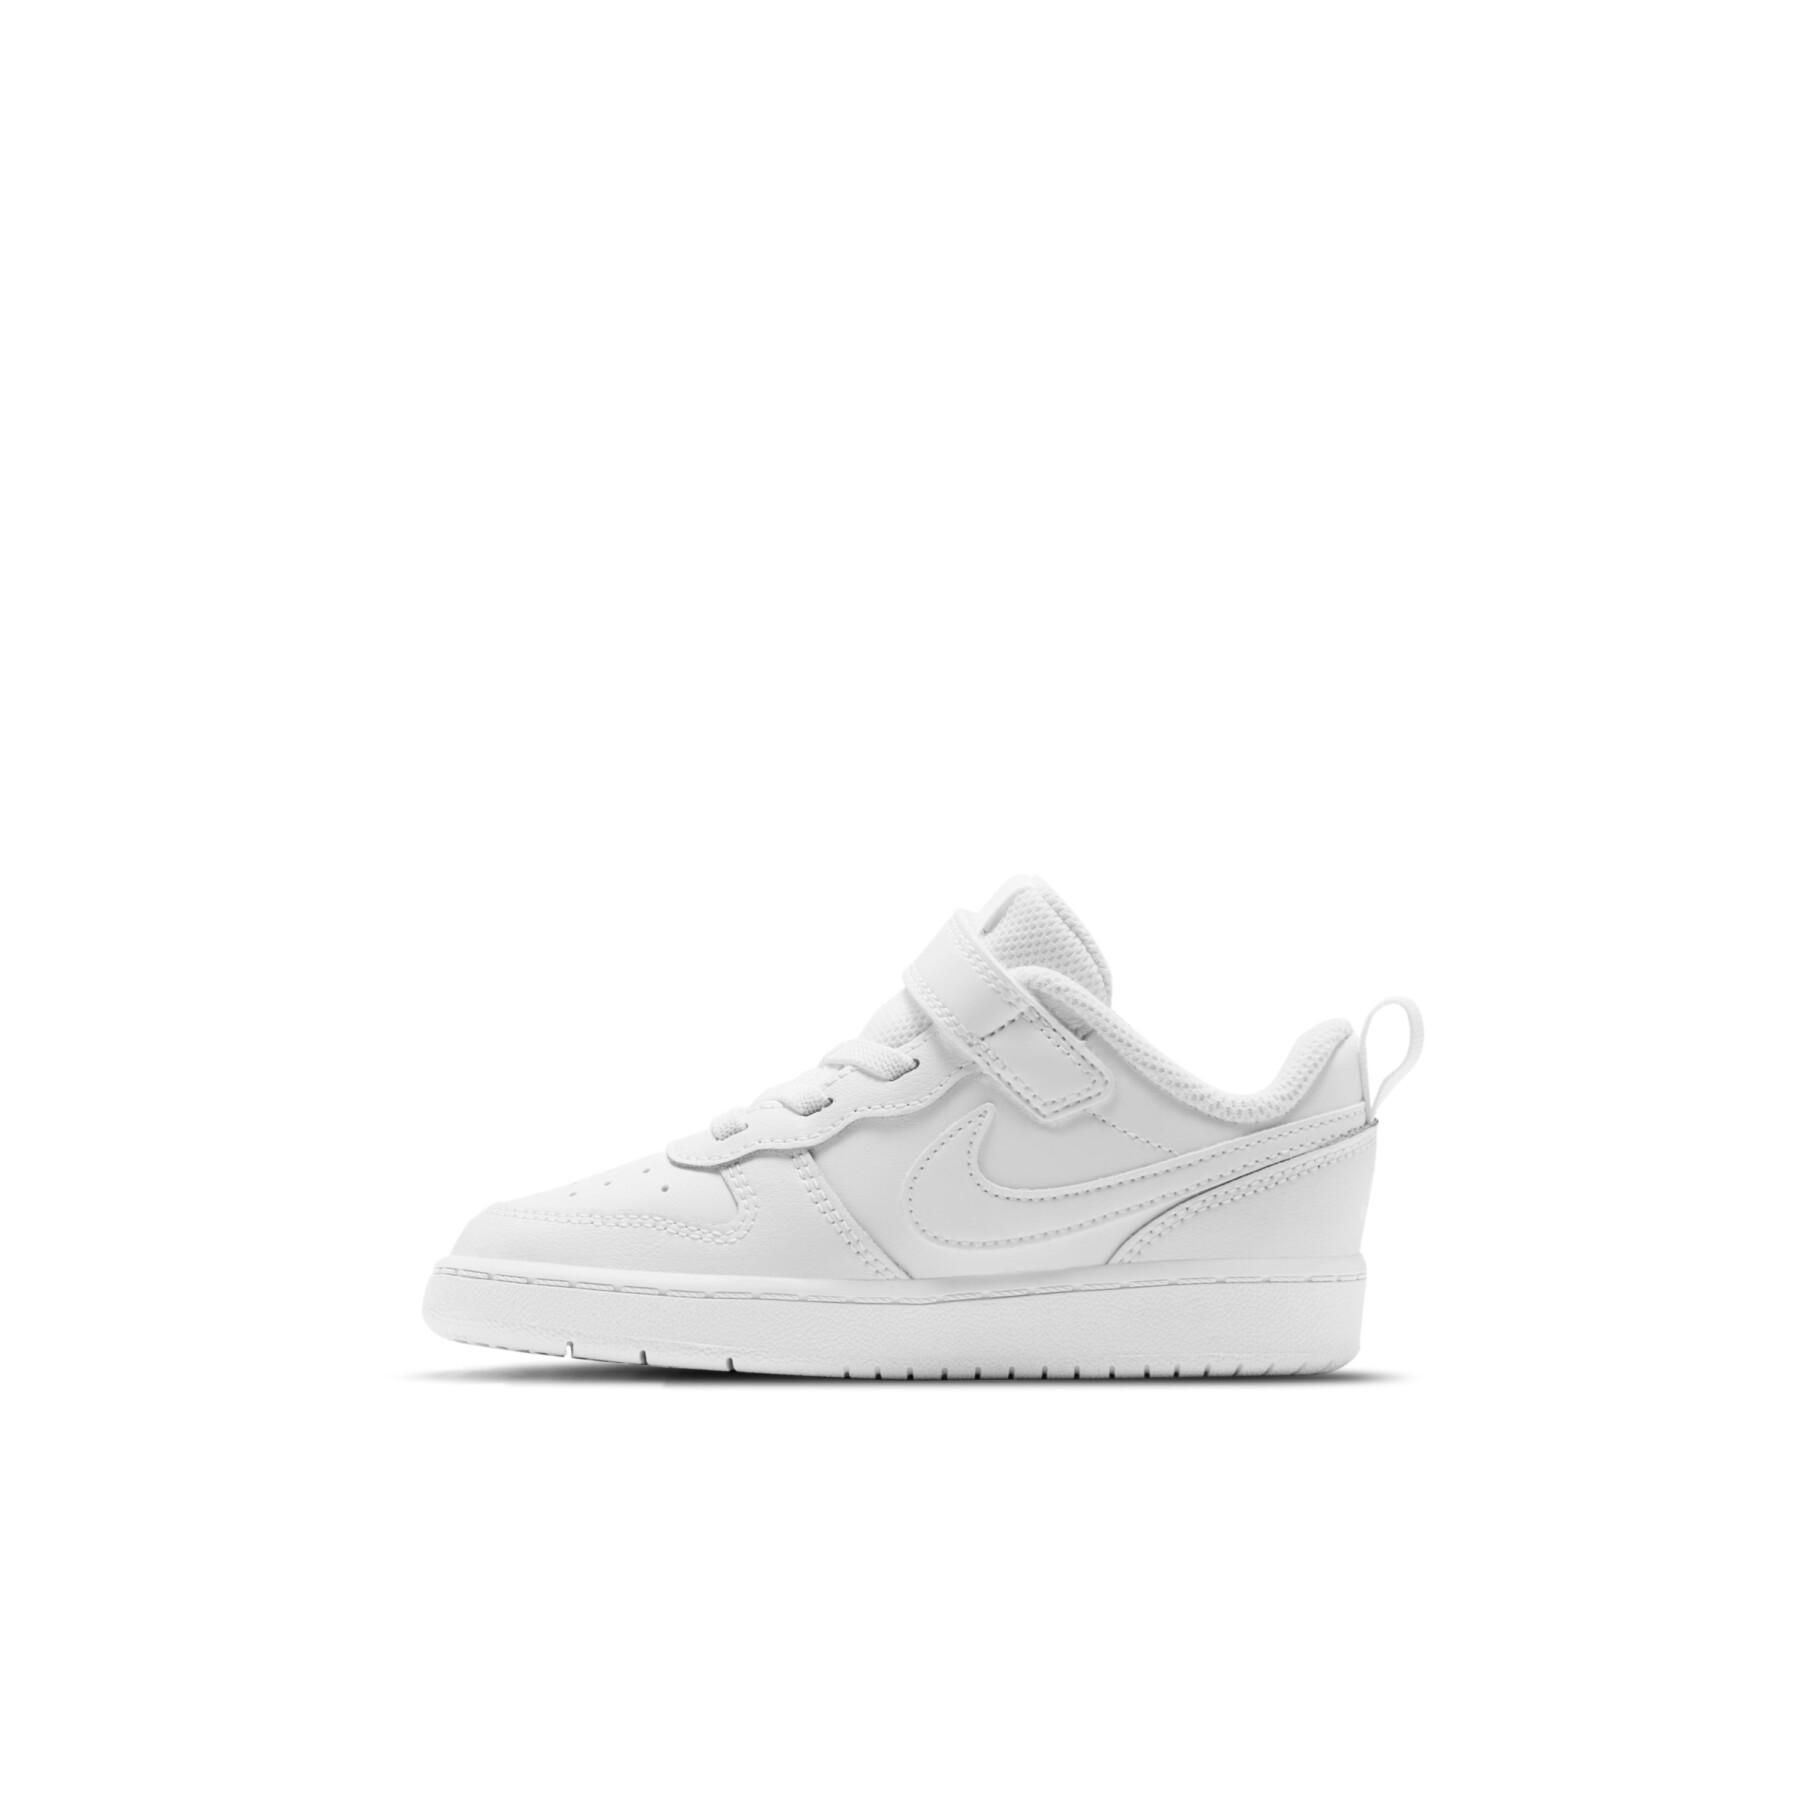 Baby sneakers Nike Court Borough Low 2